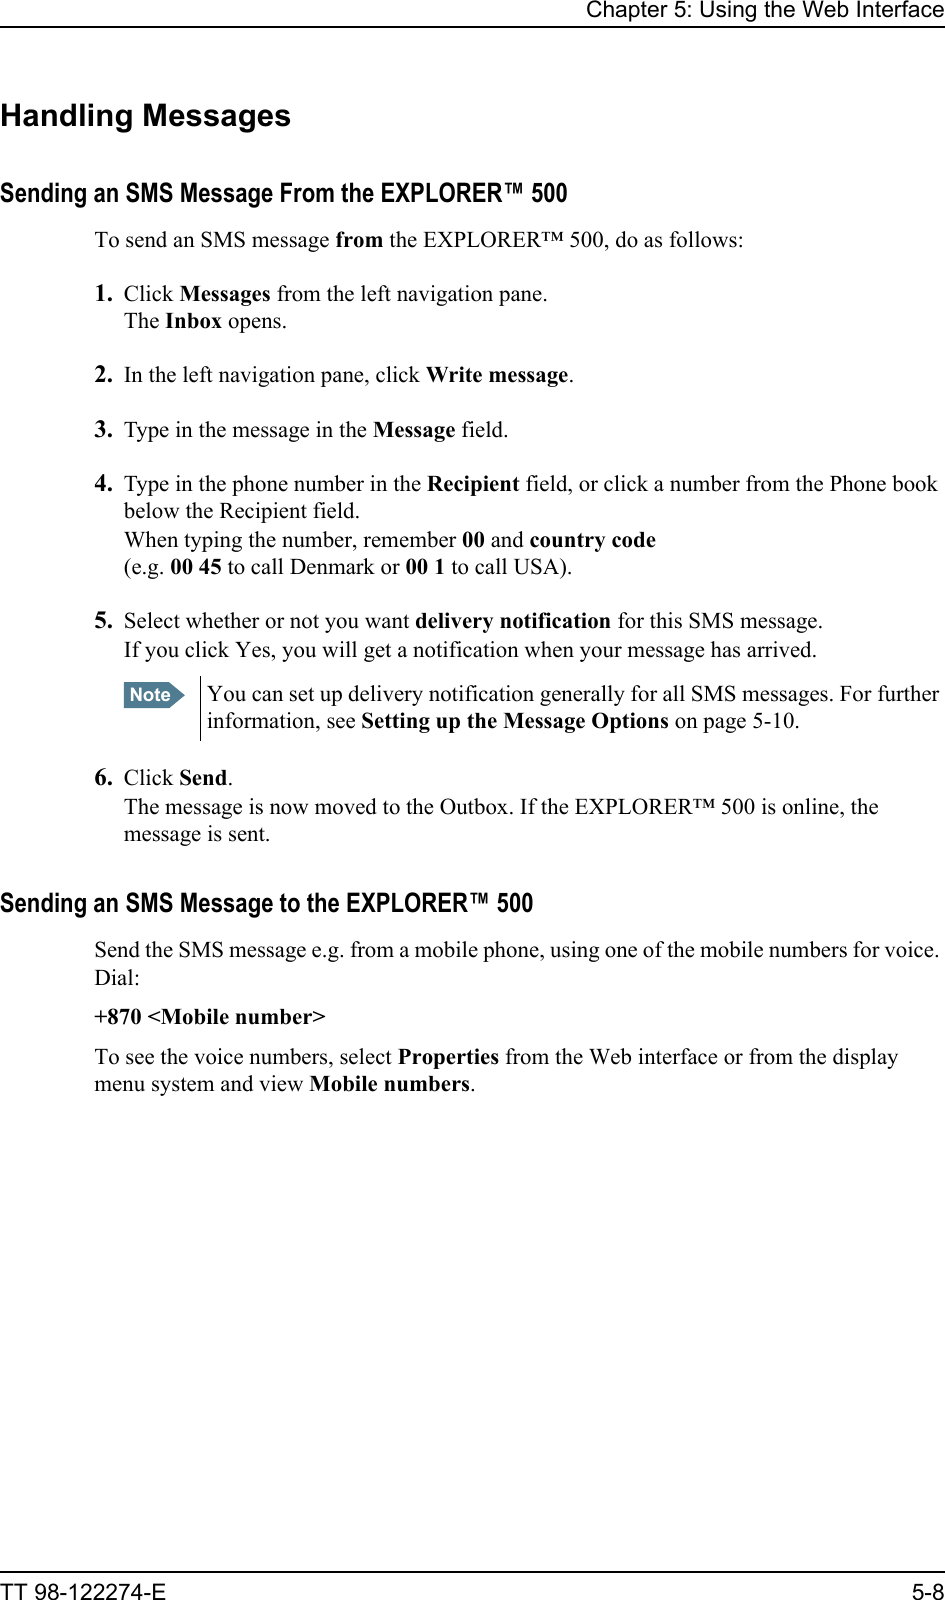 Chapter 5: Using the Web InterfaceTT 98-122274-E 5-8Handling MessagesSending an SMS Message From the EXPLORER™ 500To send an SMS message from the EXPLORER™ 500, do as follows:1. Click Messages from the left navigation pane.The Inbox opens.2. In the left navigation pane, click Write message.3. Type in the message in the Message field.4. Type in the phone number in the Recipient field, or click a number from the Phone book below the Recipient field. When typing the number, remember 00 and country code(e.g. 00 45 to call Denmark or 00 1 to call USA).5. Select whether or not you want delivery notification for this SMS message. If you click Yes, you will get a notification when your message has arrived.6. Click Send.The message is now moved to the Outbox. If the EXPLORER™ 500 is online, the message is sent.Sending an SMS Message to the EXPLORER™ 500Send the SMS message e.g. from a mobile phone, using one of the mobile numbers for voice. Dial:+870 &lt;Mobile number&gt;To see the voice numbers, select Properties from the Web interface or from the display menu system and view Mobile numbers.Note You can set up delivery notification generally for all SMS messages. For further information, see Setting up the Message Options on page 5-10.